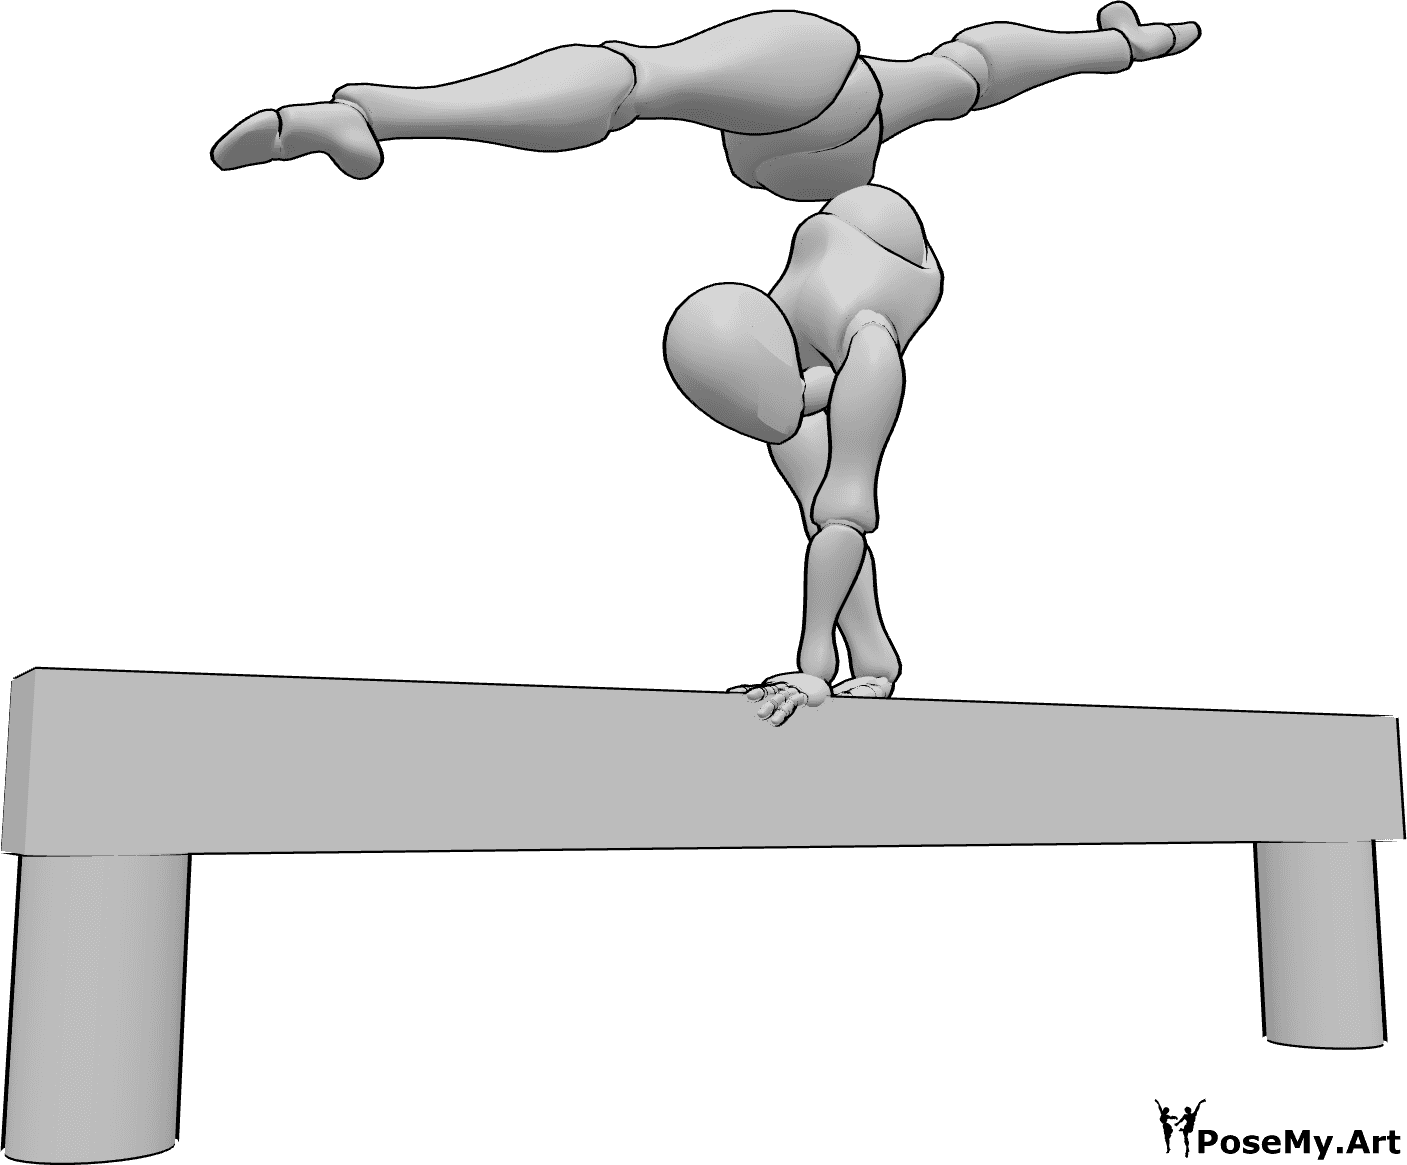 Pose Reference- Handstanding split vaulting pose - Female is handstanding on the vault and doing a front split in the air